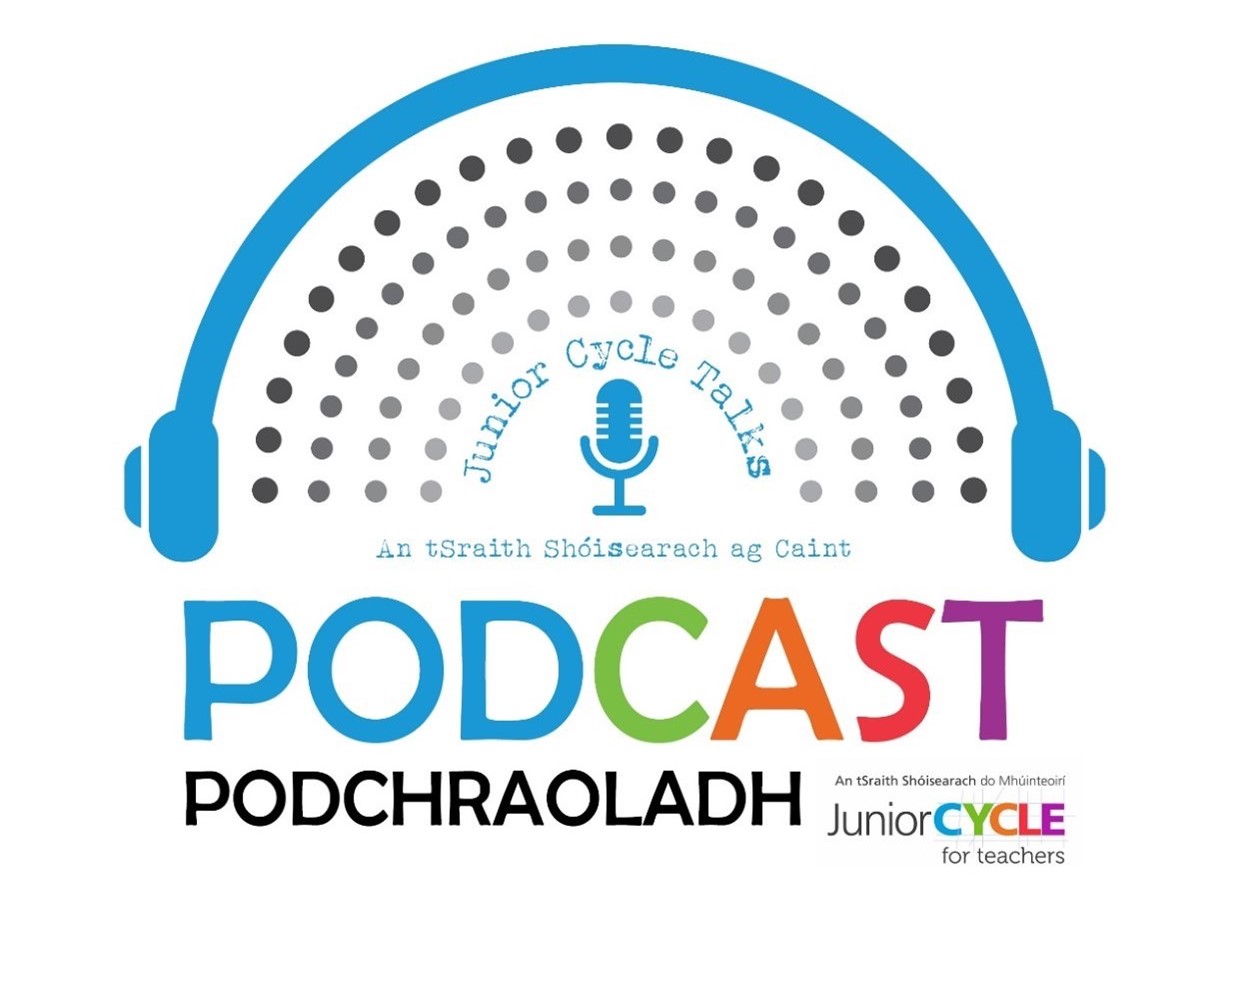 Podcast 2 Thoughts on Planning for Inclusion and Wellbeing